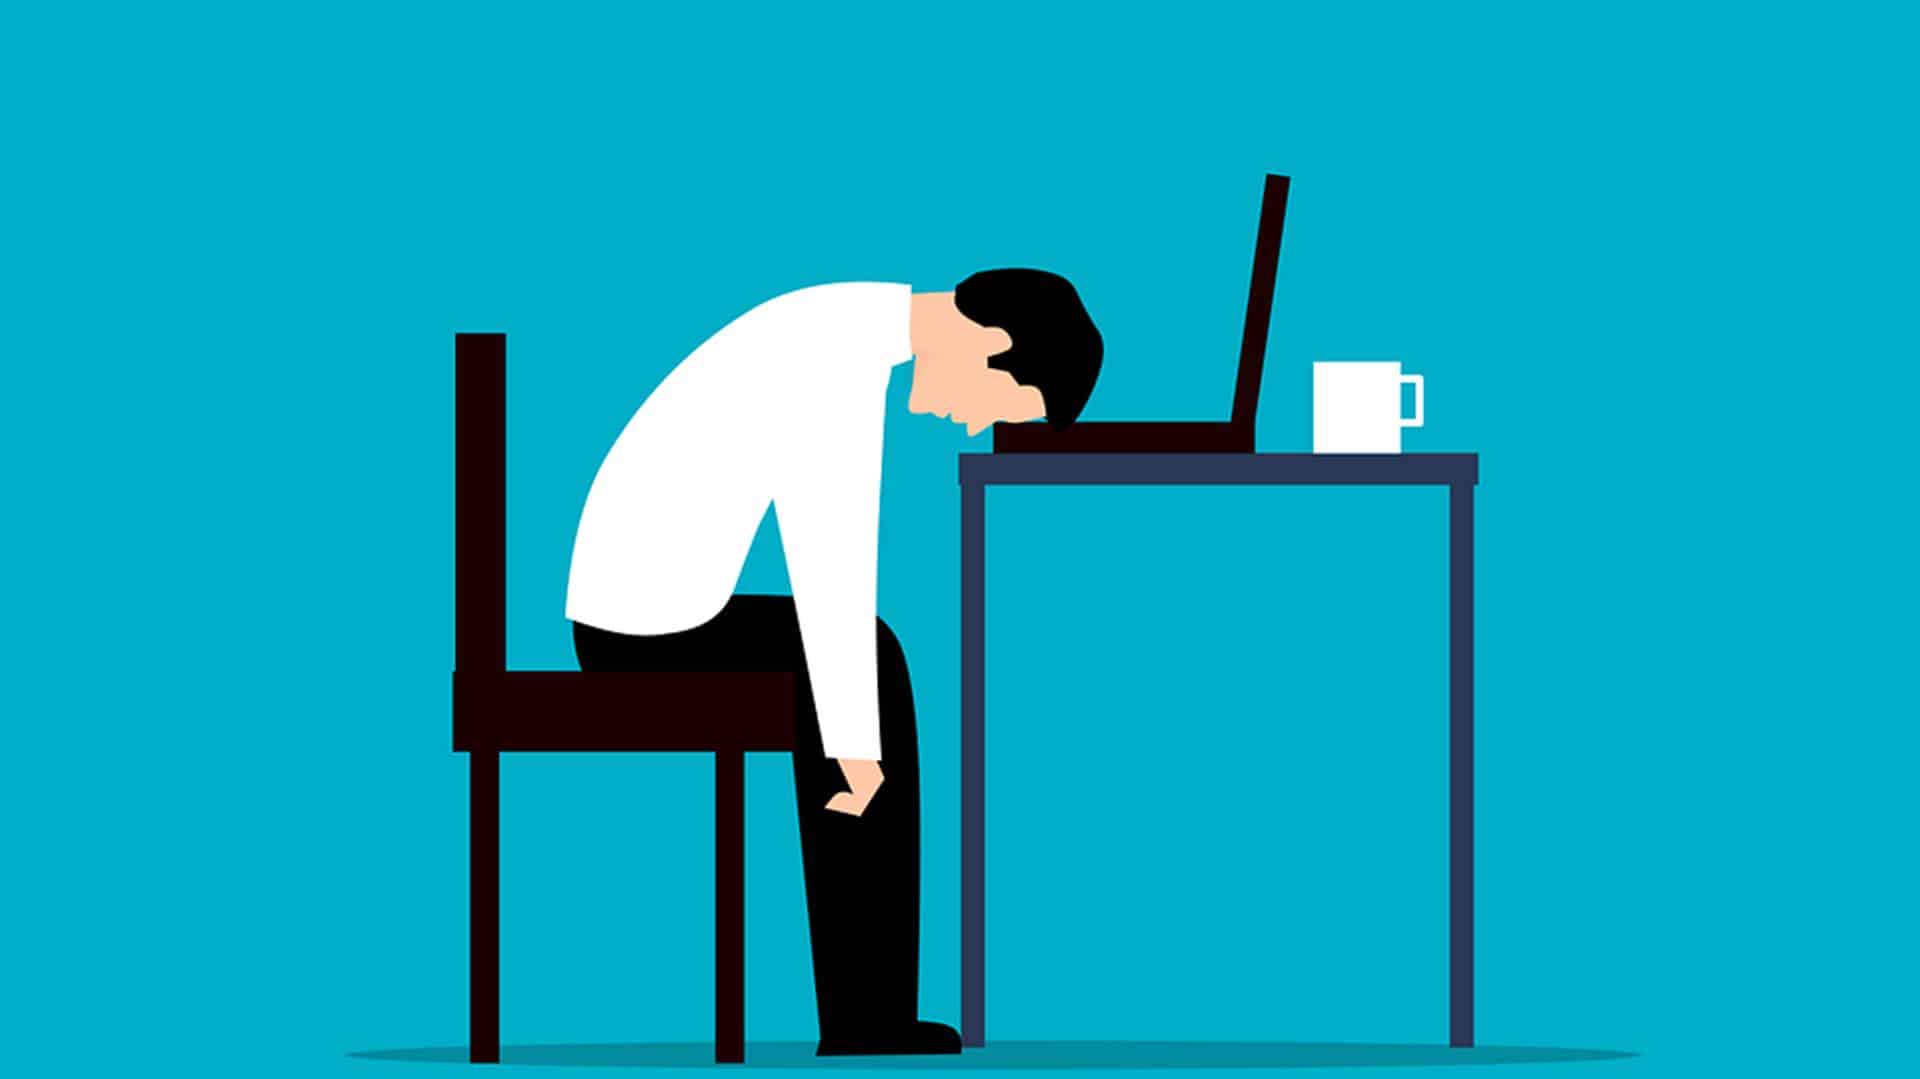 59 pc men feel work stress taking toll on personal lives: Survey